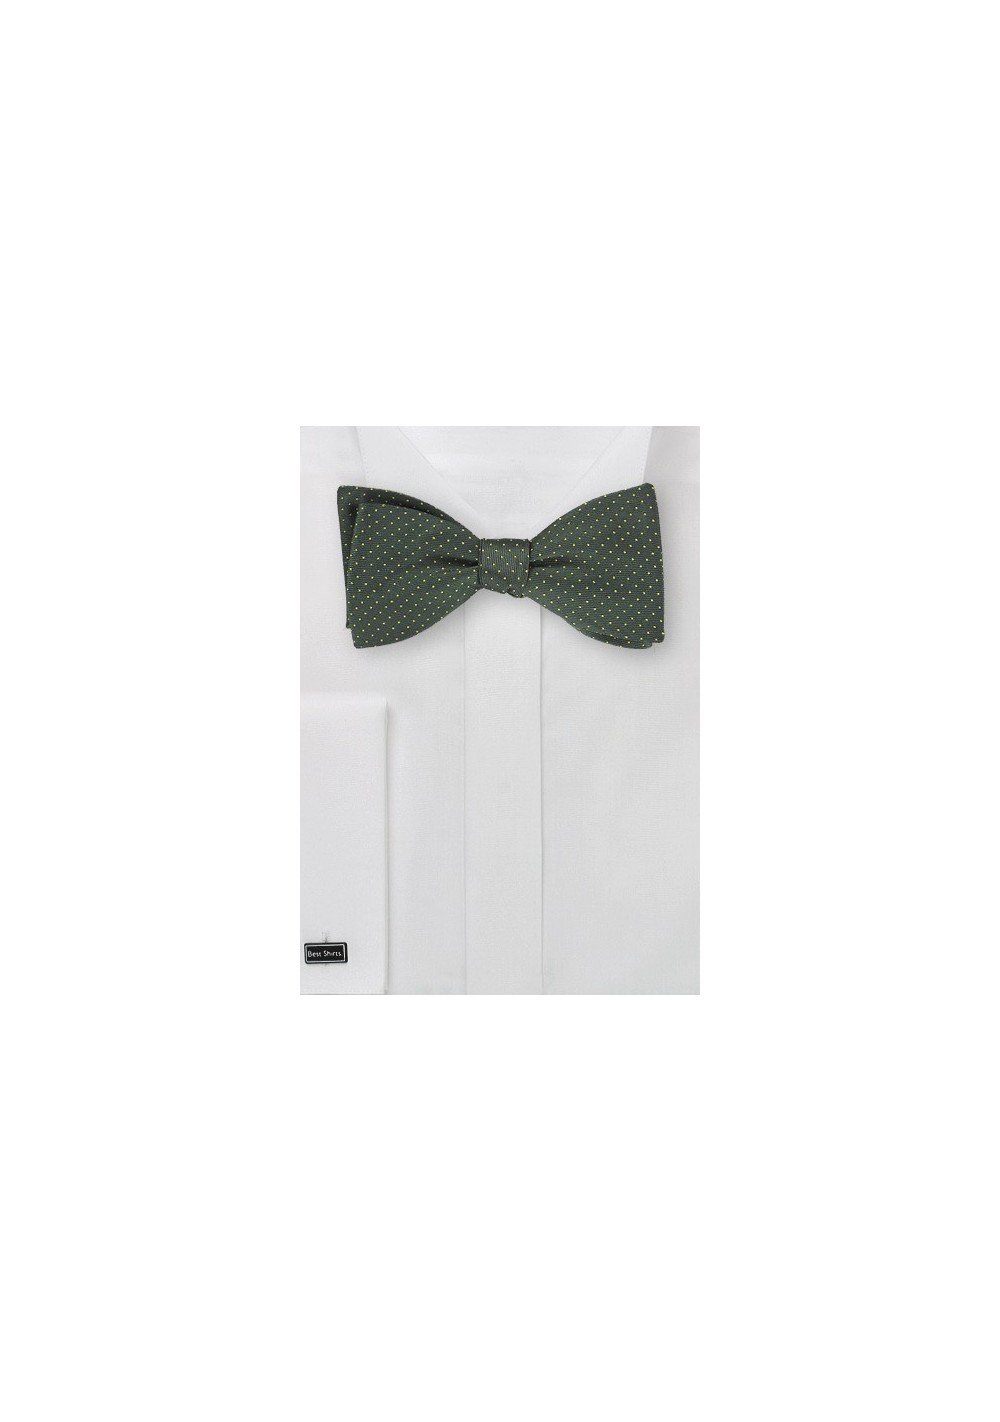 Dark Green Bow Tie with Tiny Yellow Dots